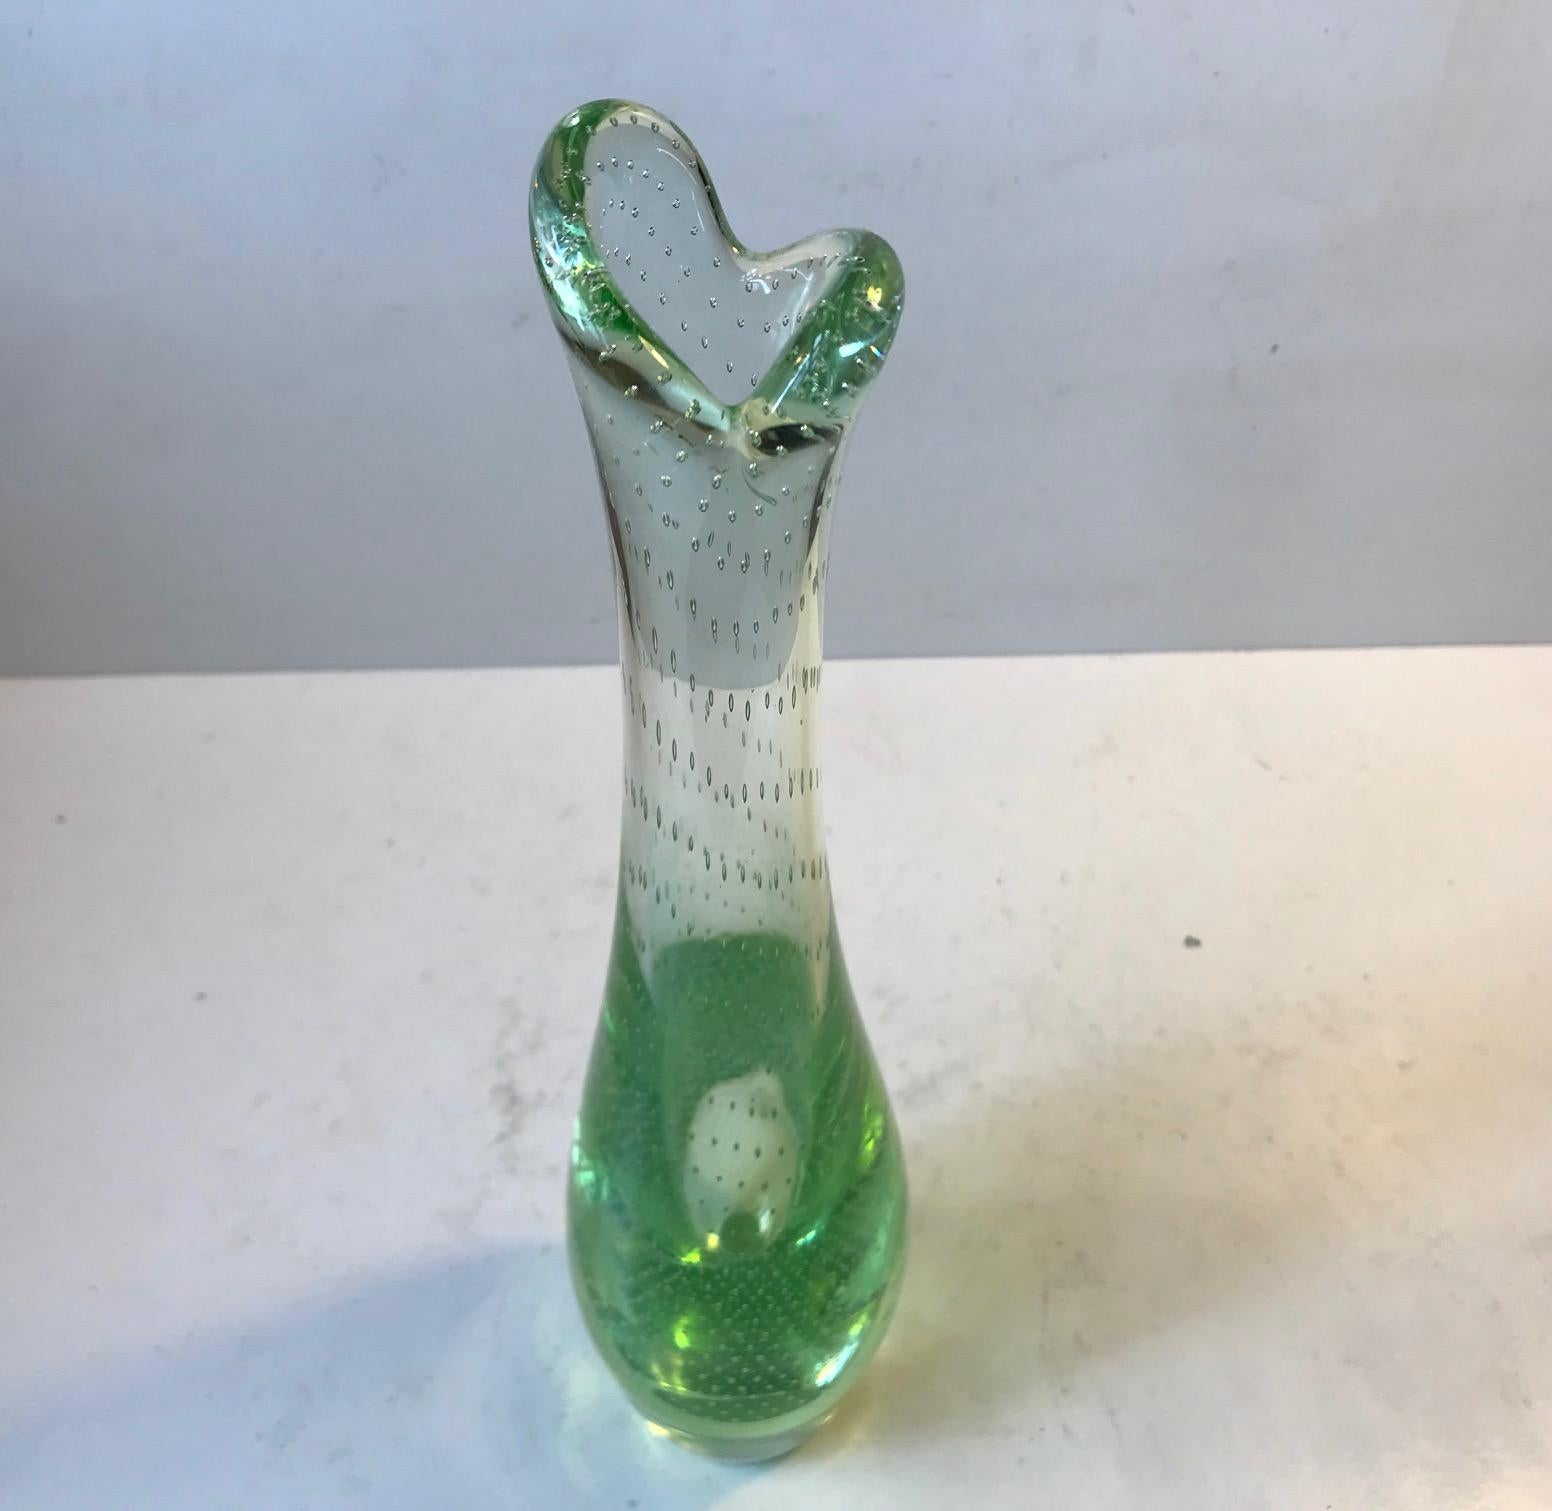 Danish Light Green Duckling Glass Vase with Air Bubbles by Per Lütken, Holmegaard 1950s For Sale